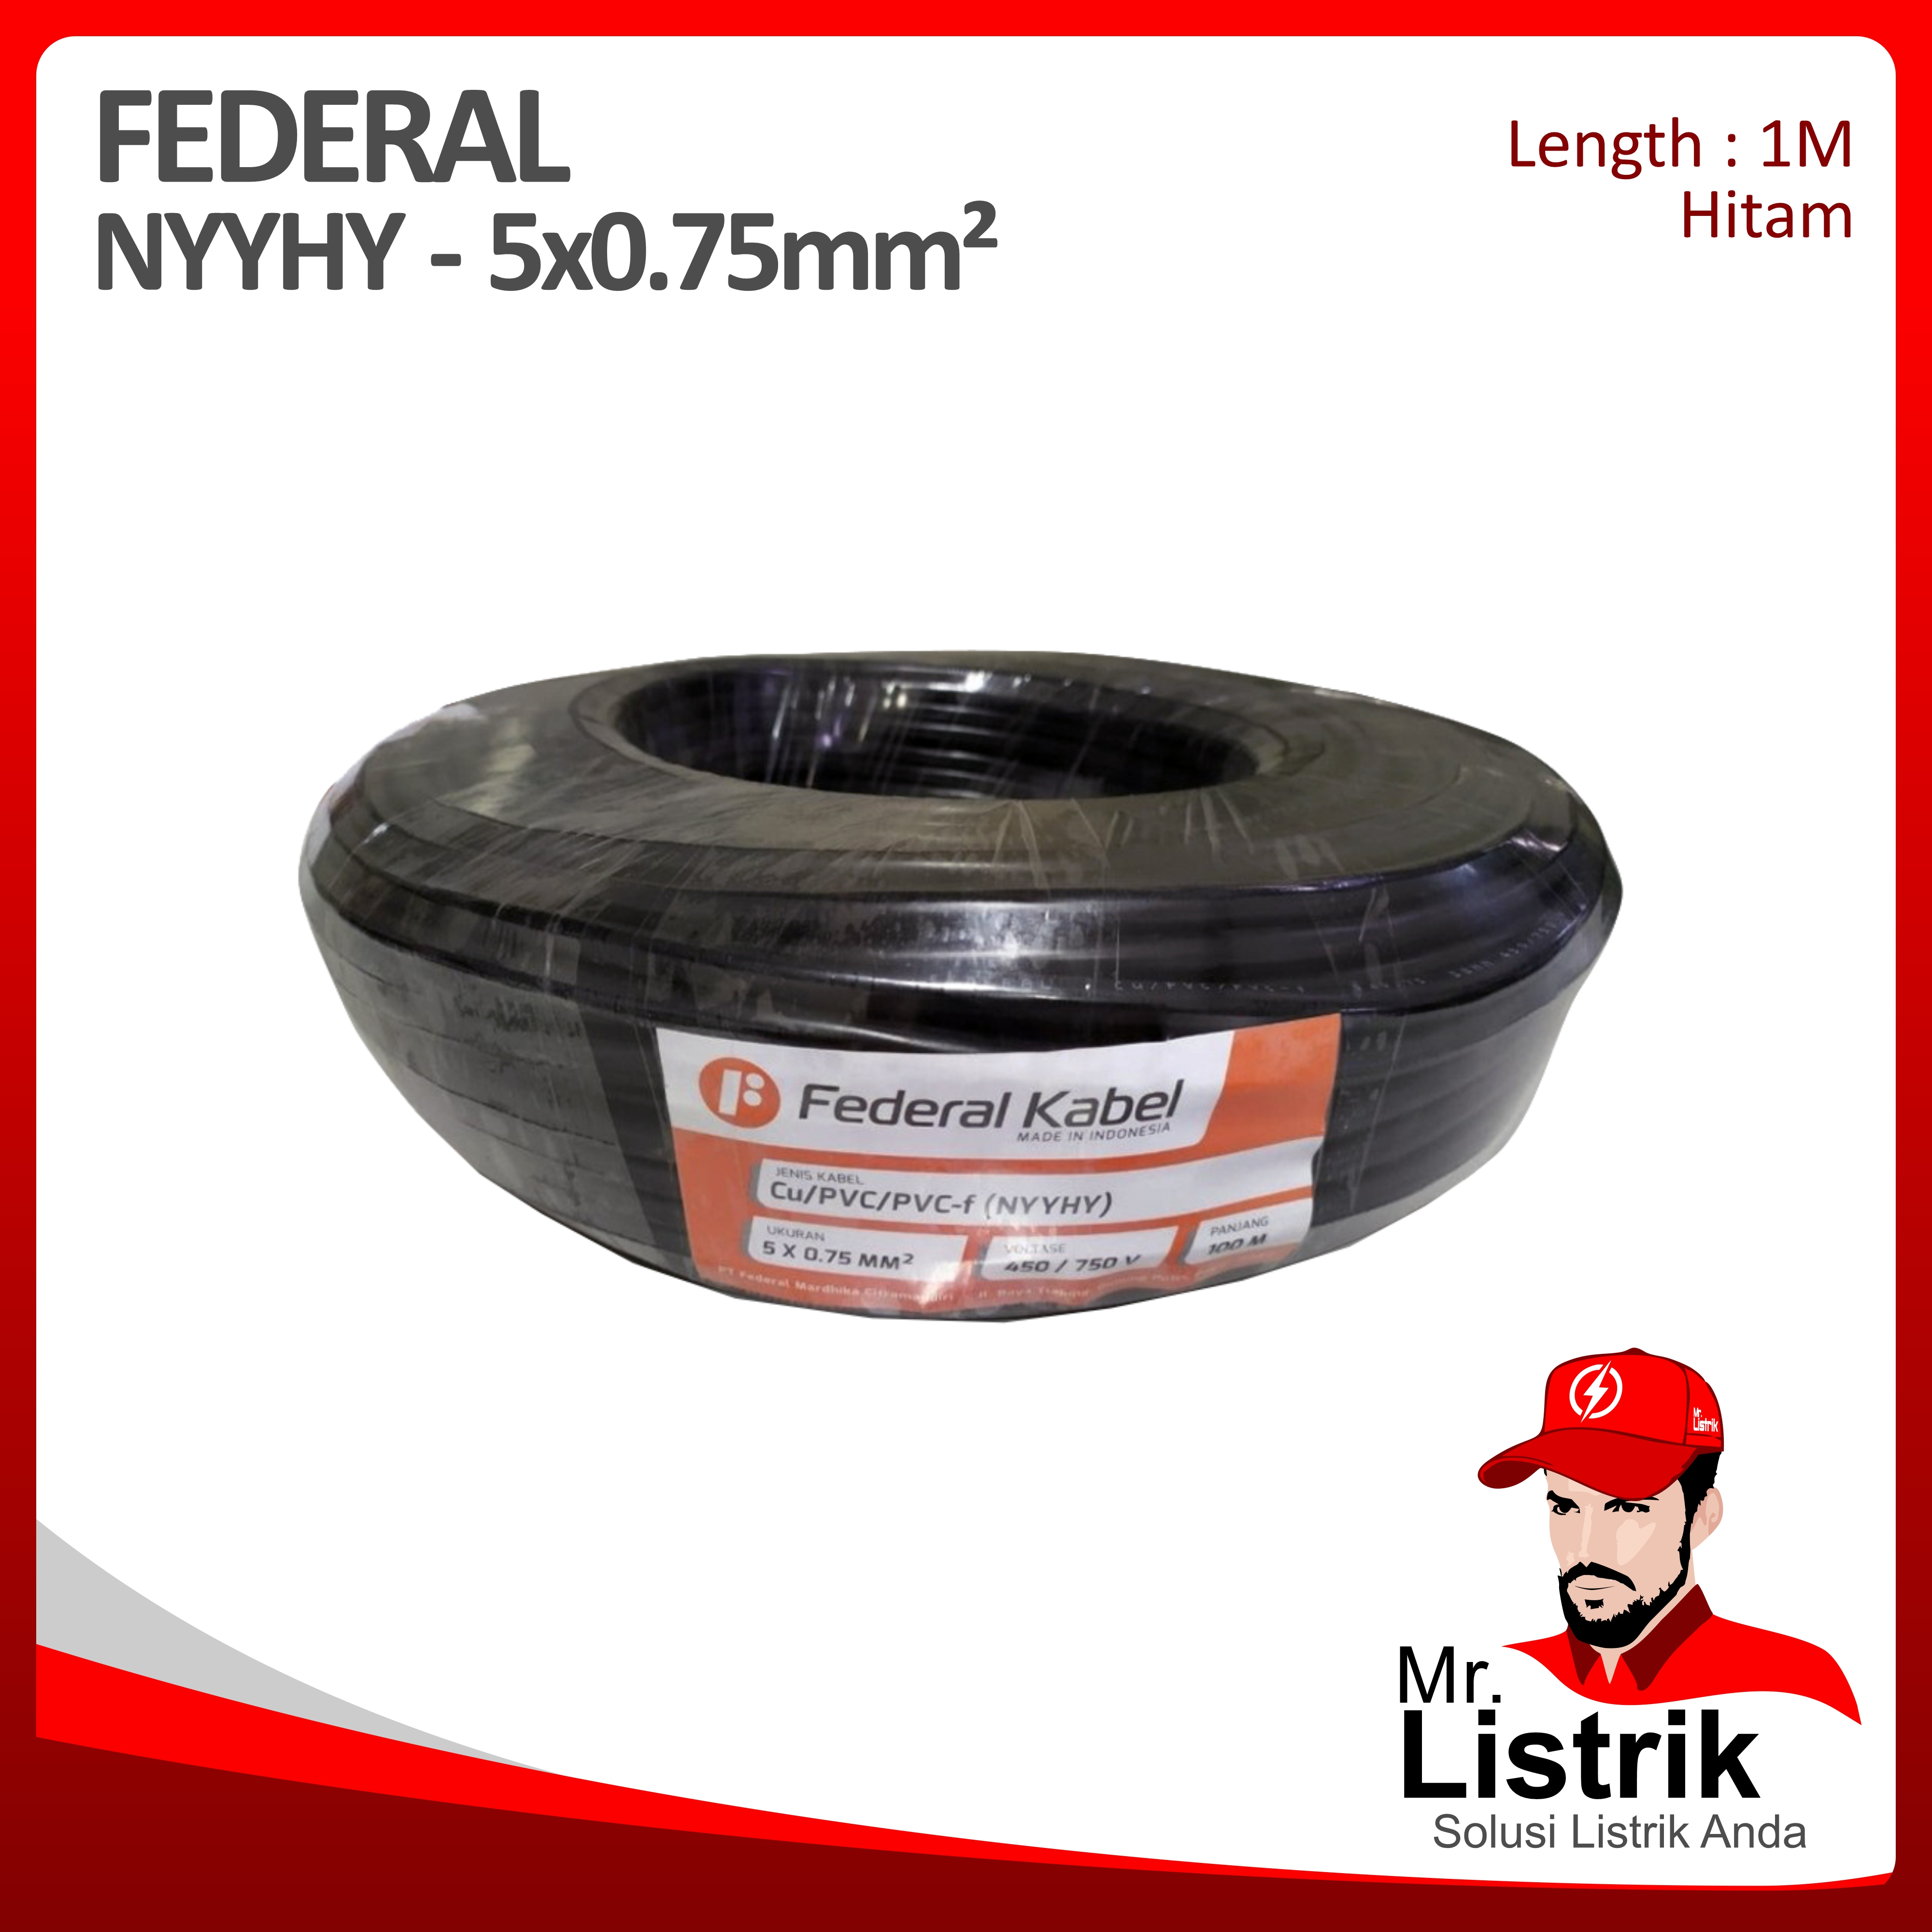 Kabel NYYHY Federal 5x0.75 mm² @1 Mtr